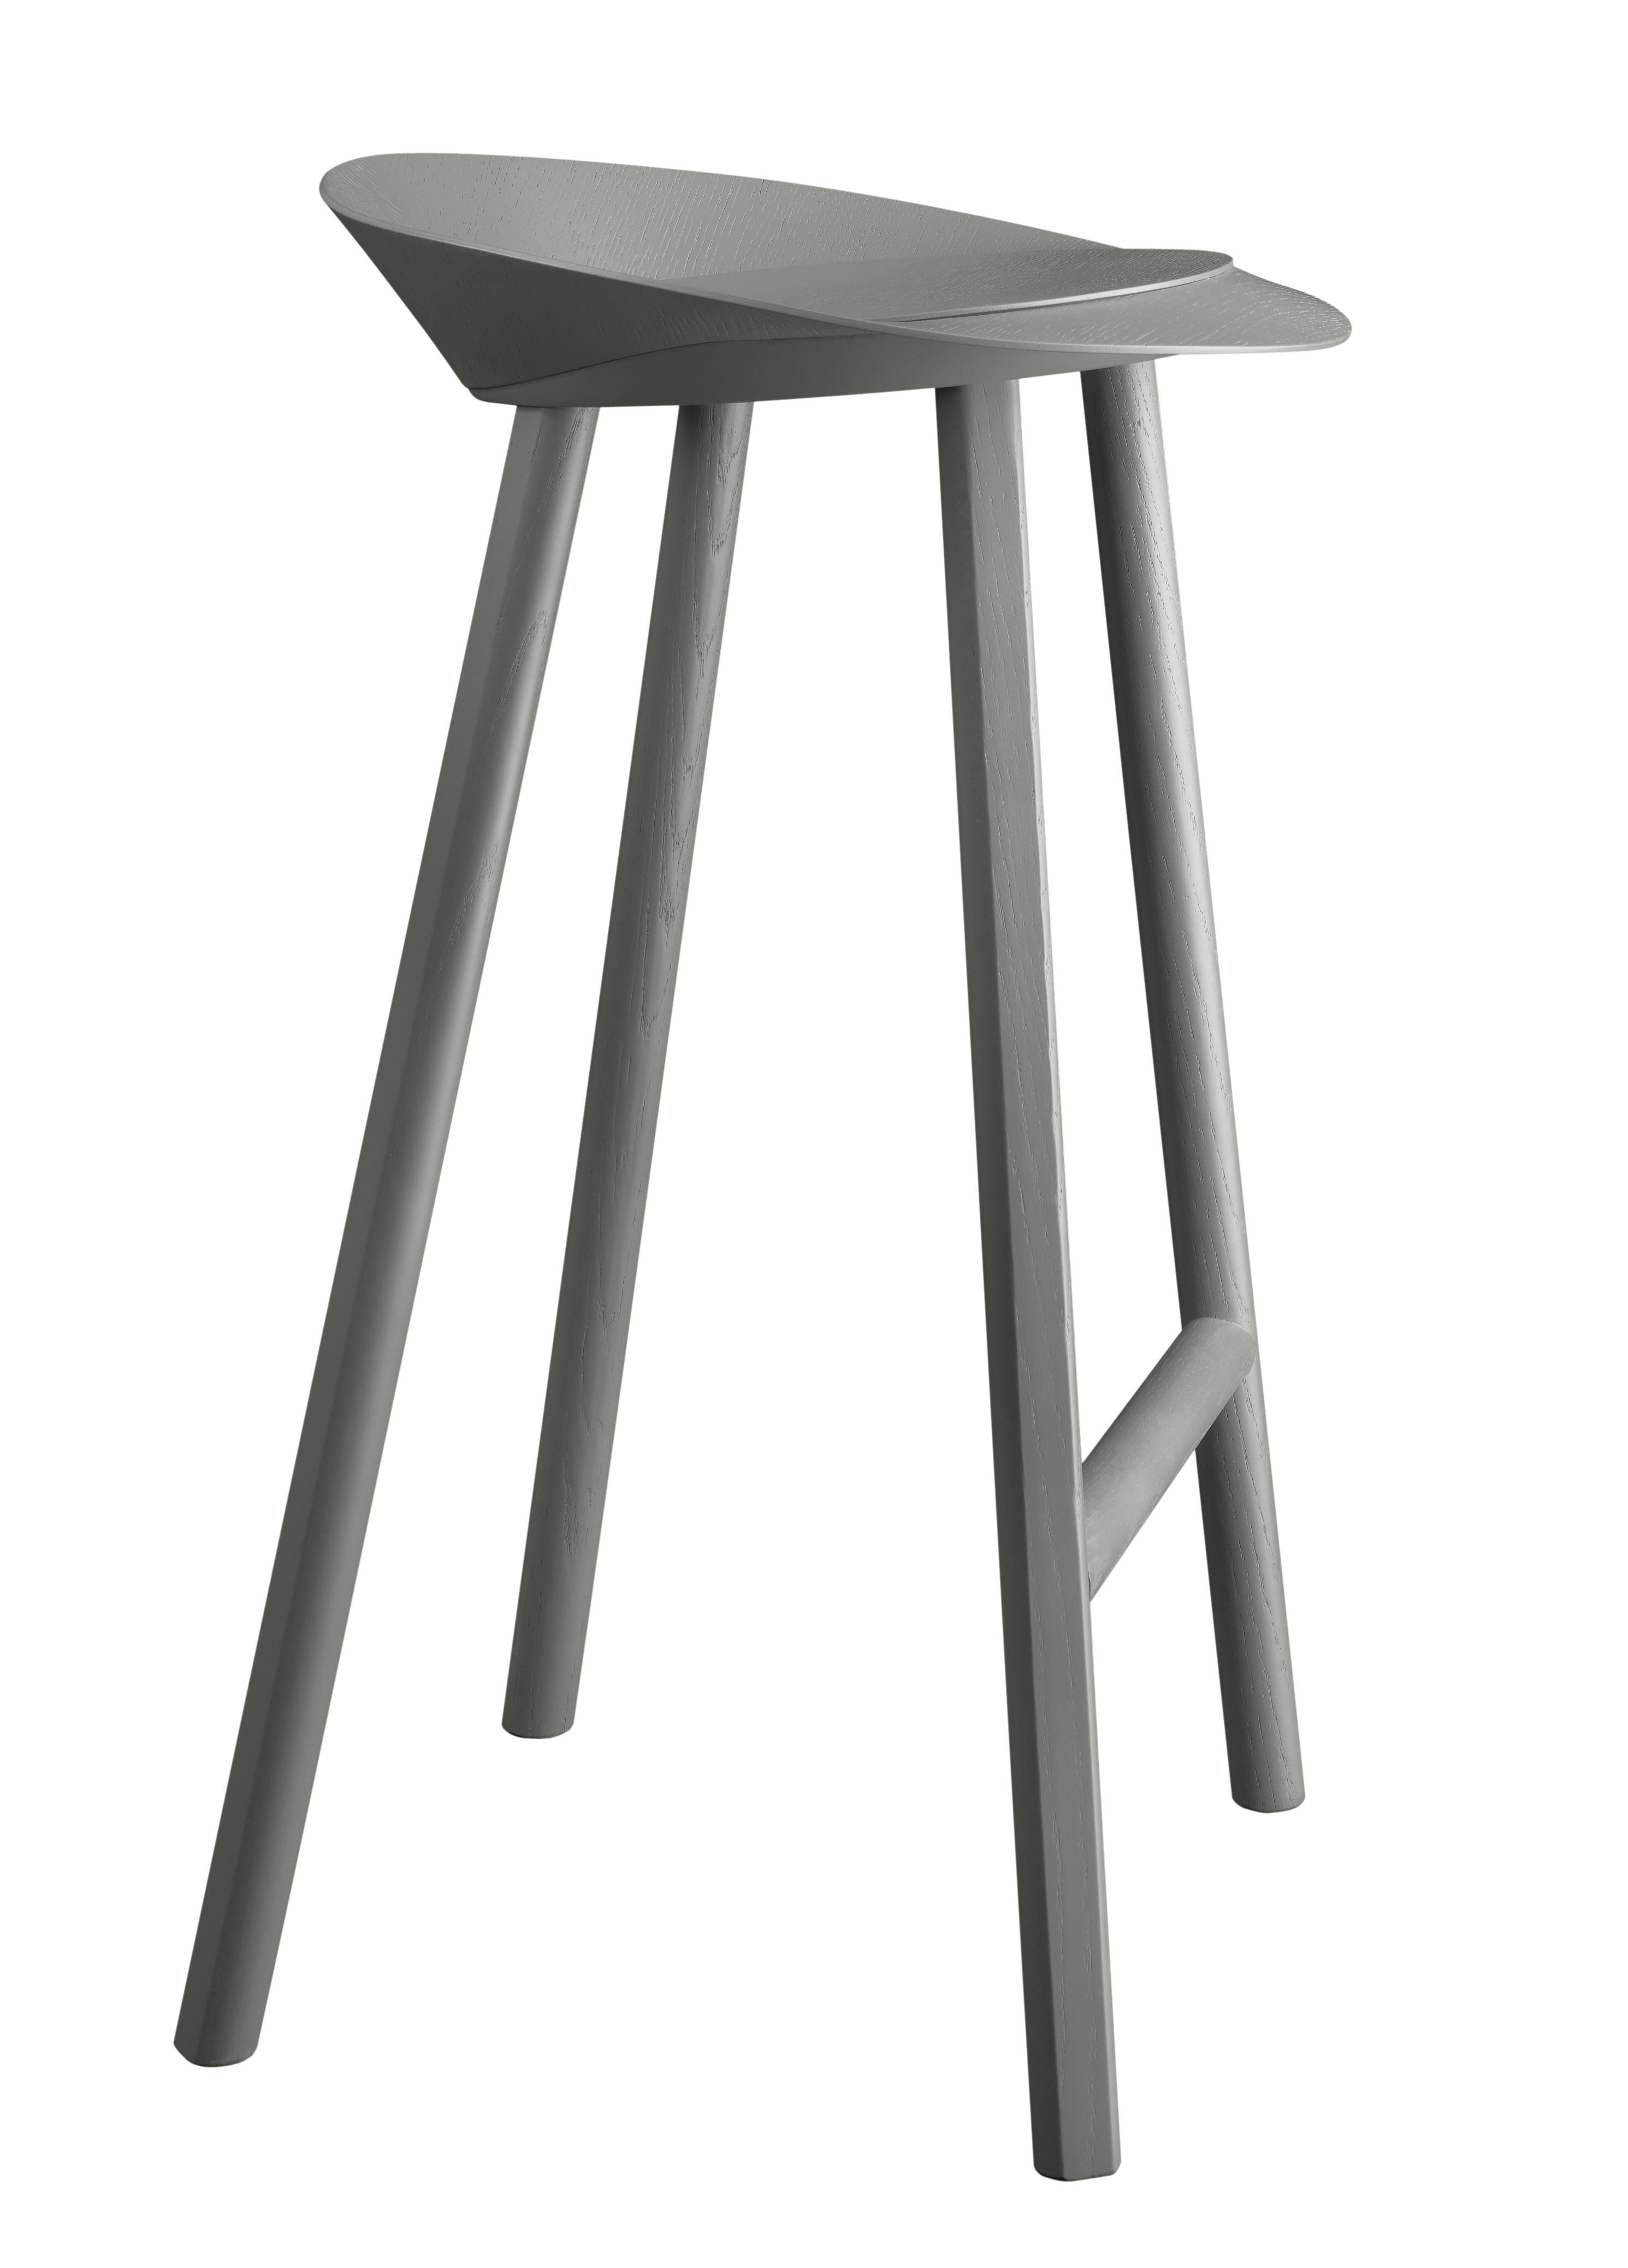 For Sale: Gray (Umbra Gray Lacquer) e15 Customizable Jean Stool Wood by Stefan Diez